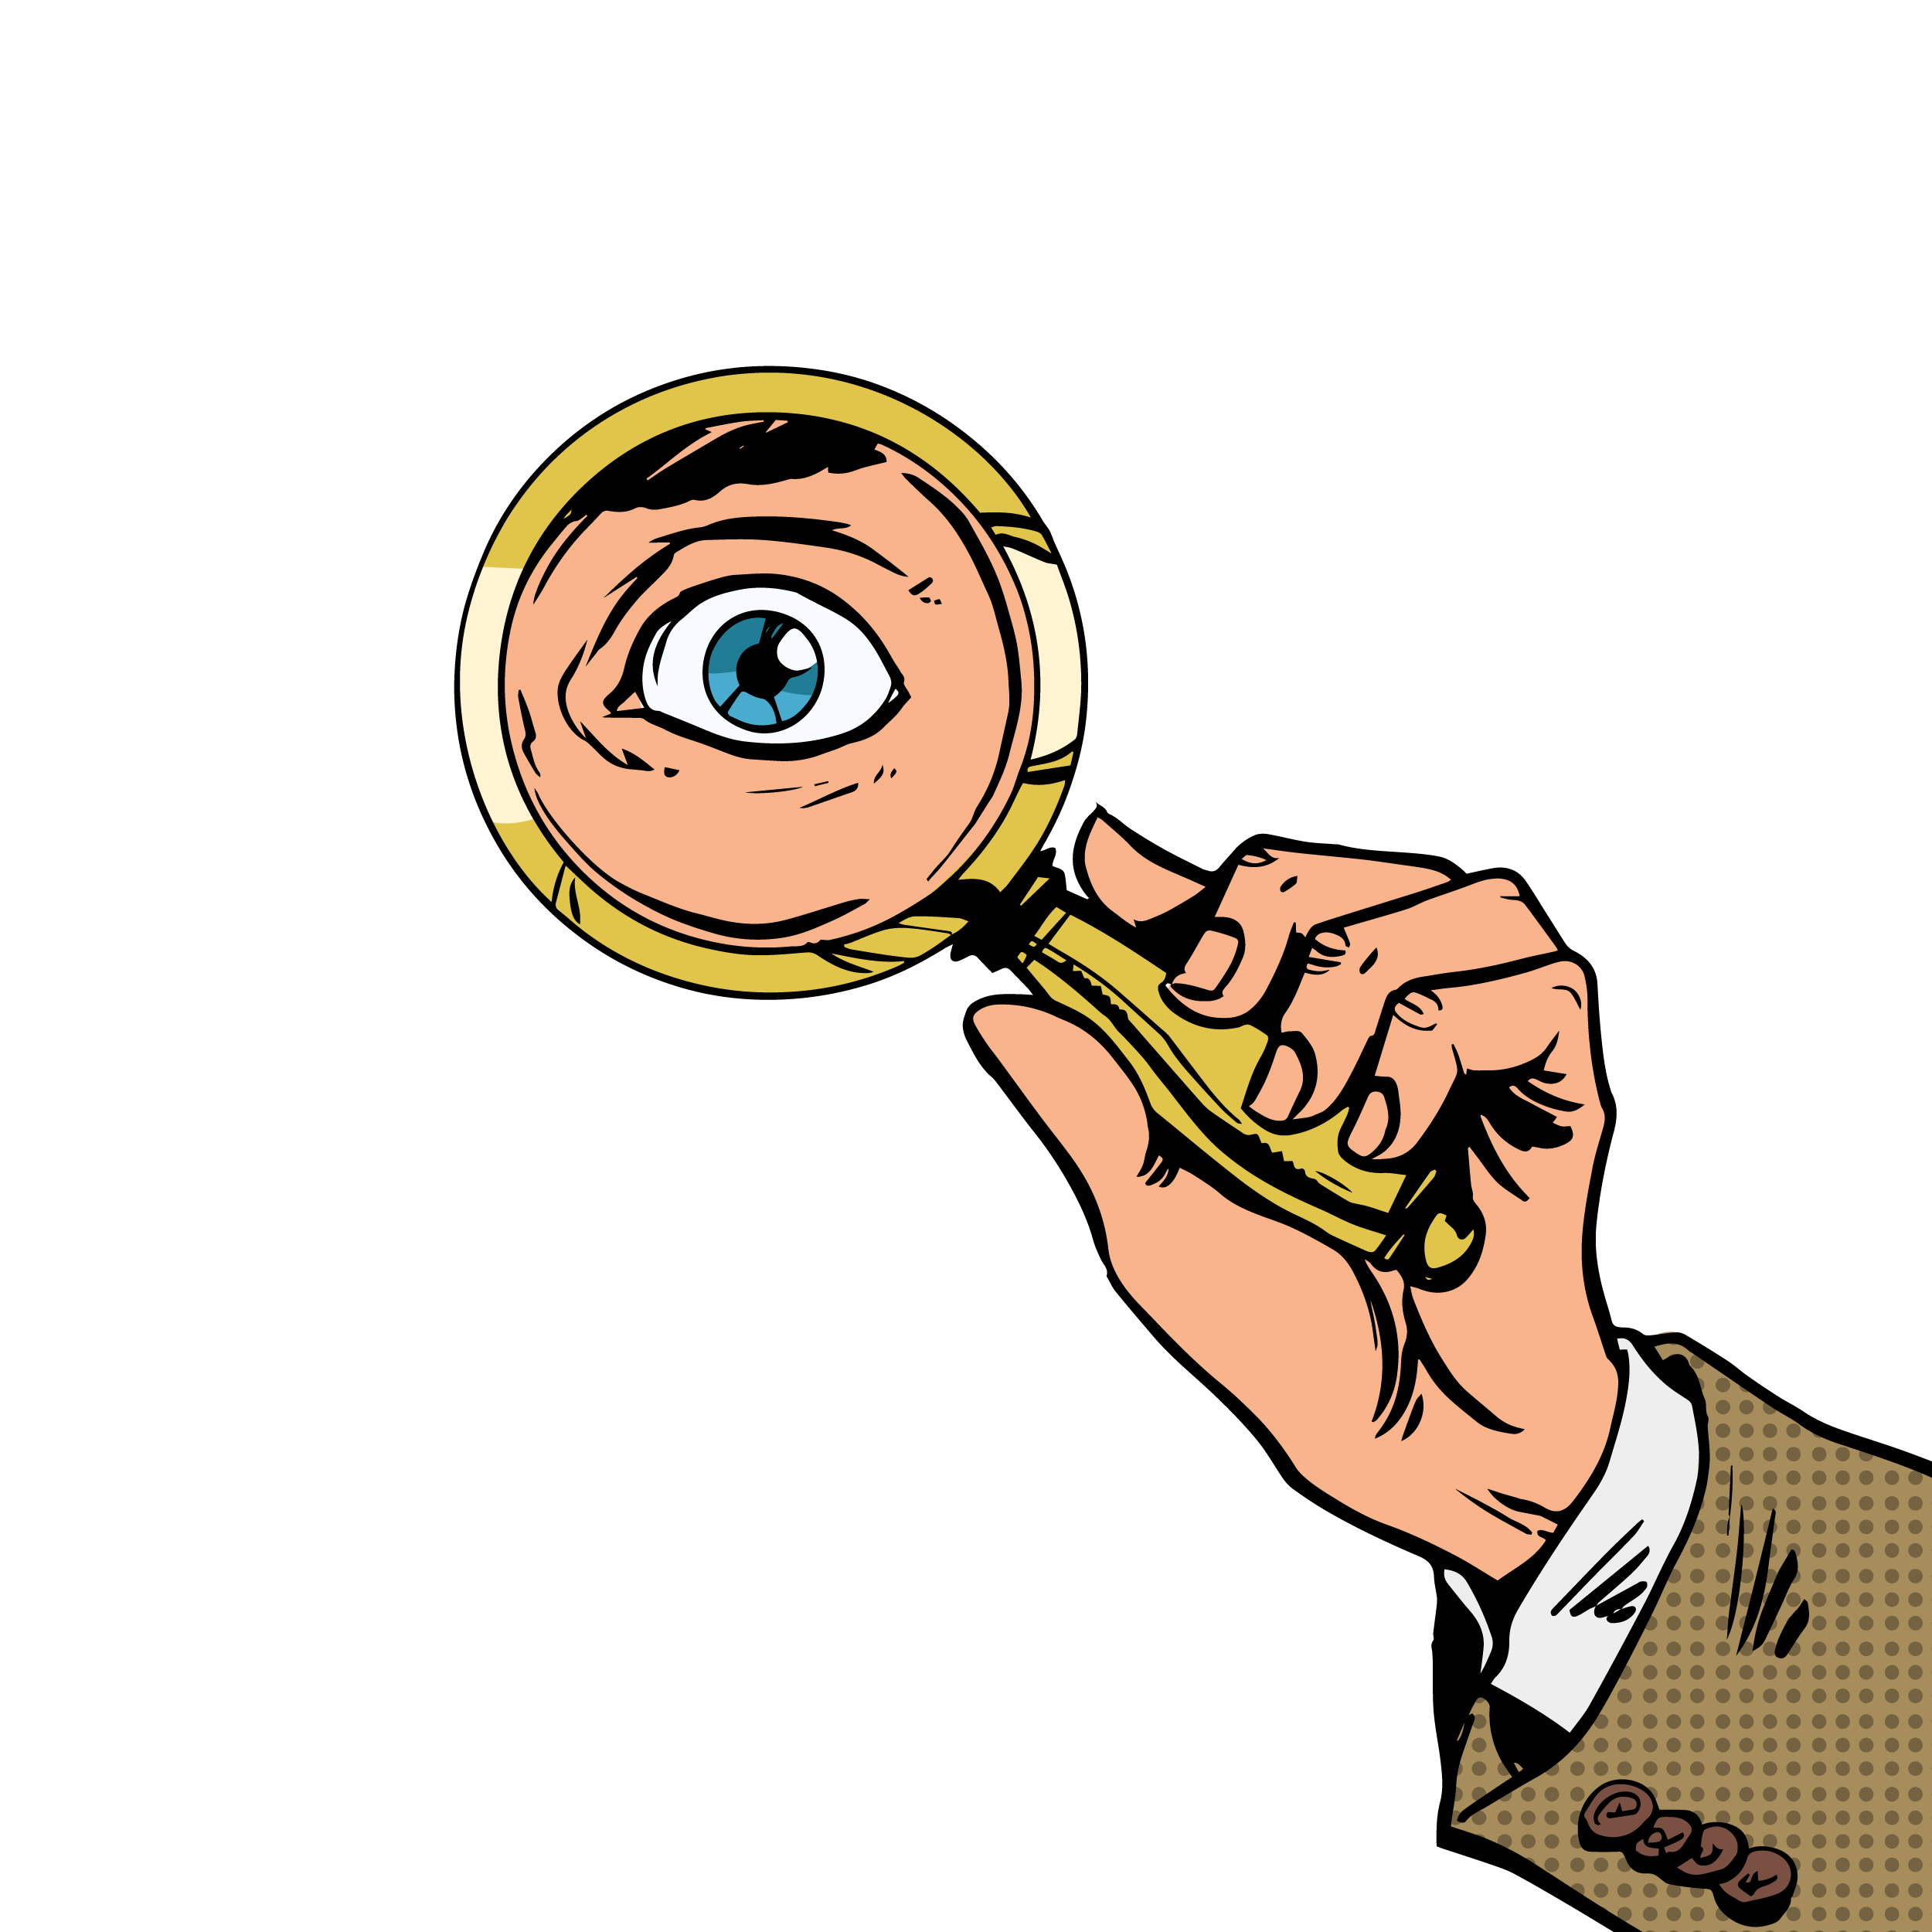 eyes clipart magnifying glass